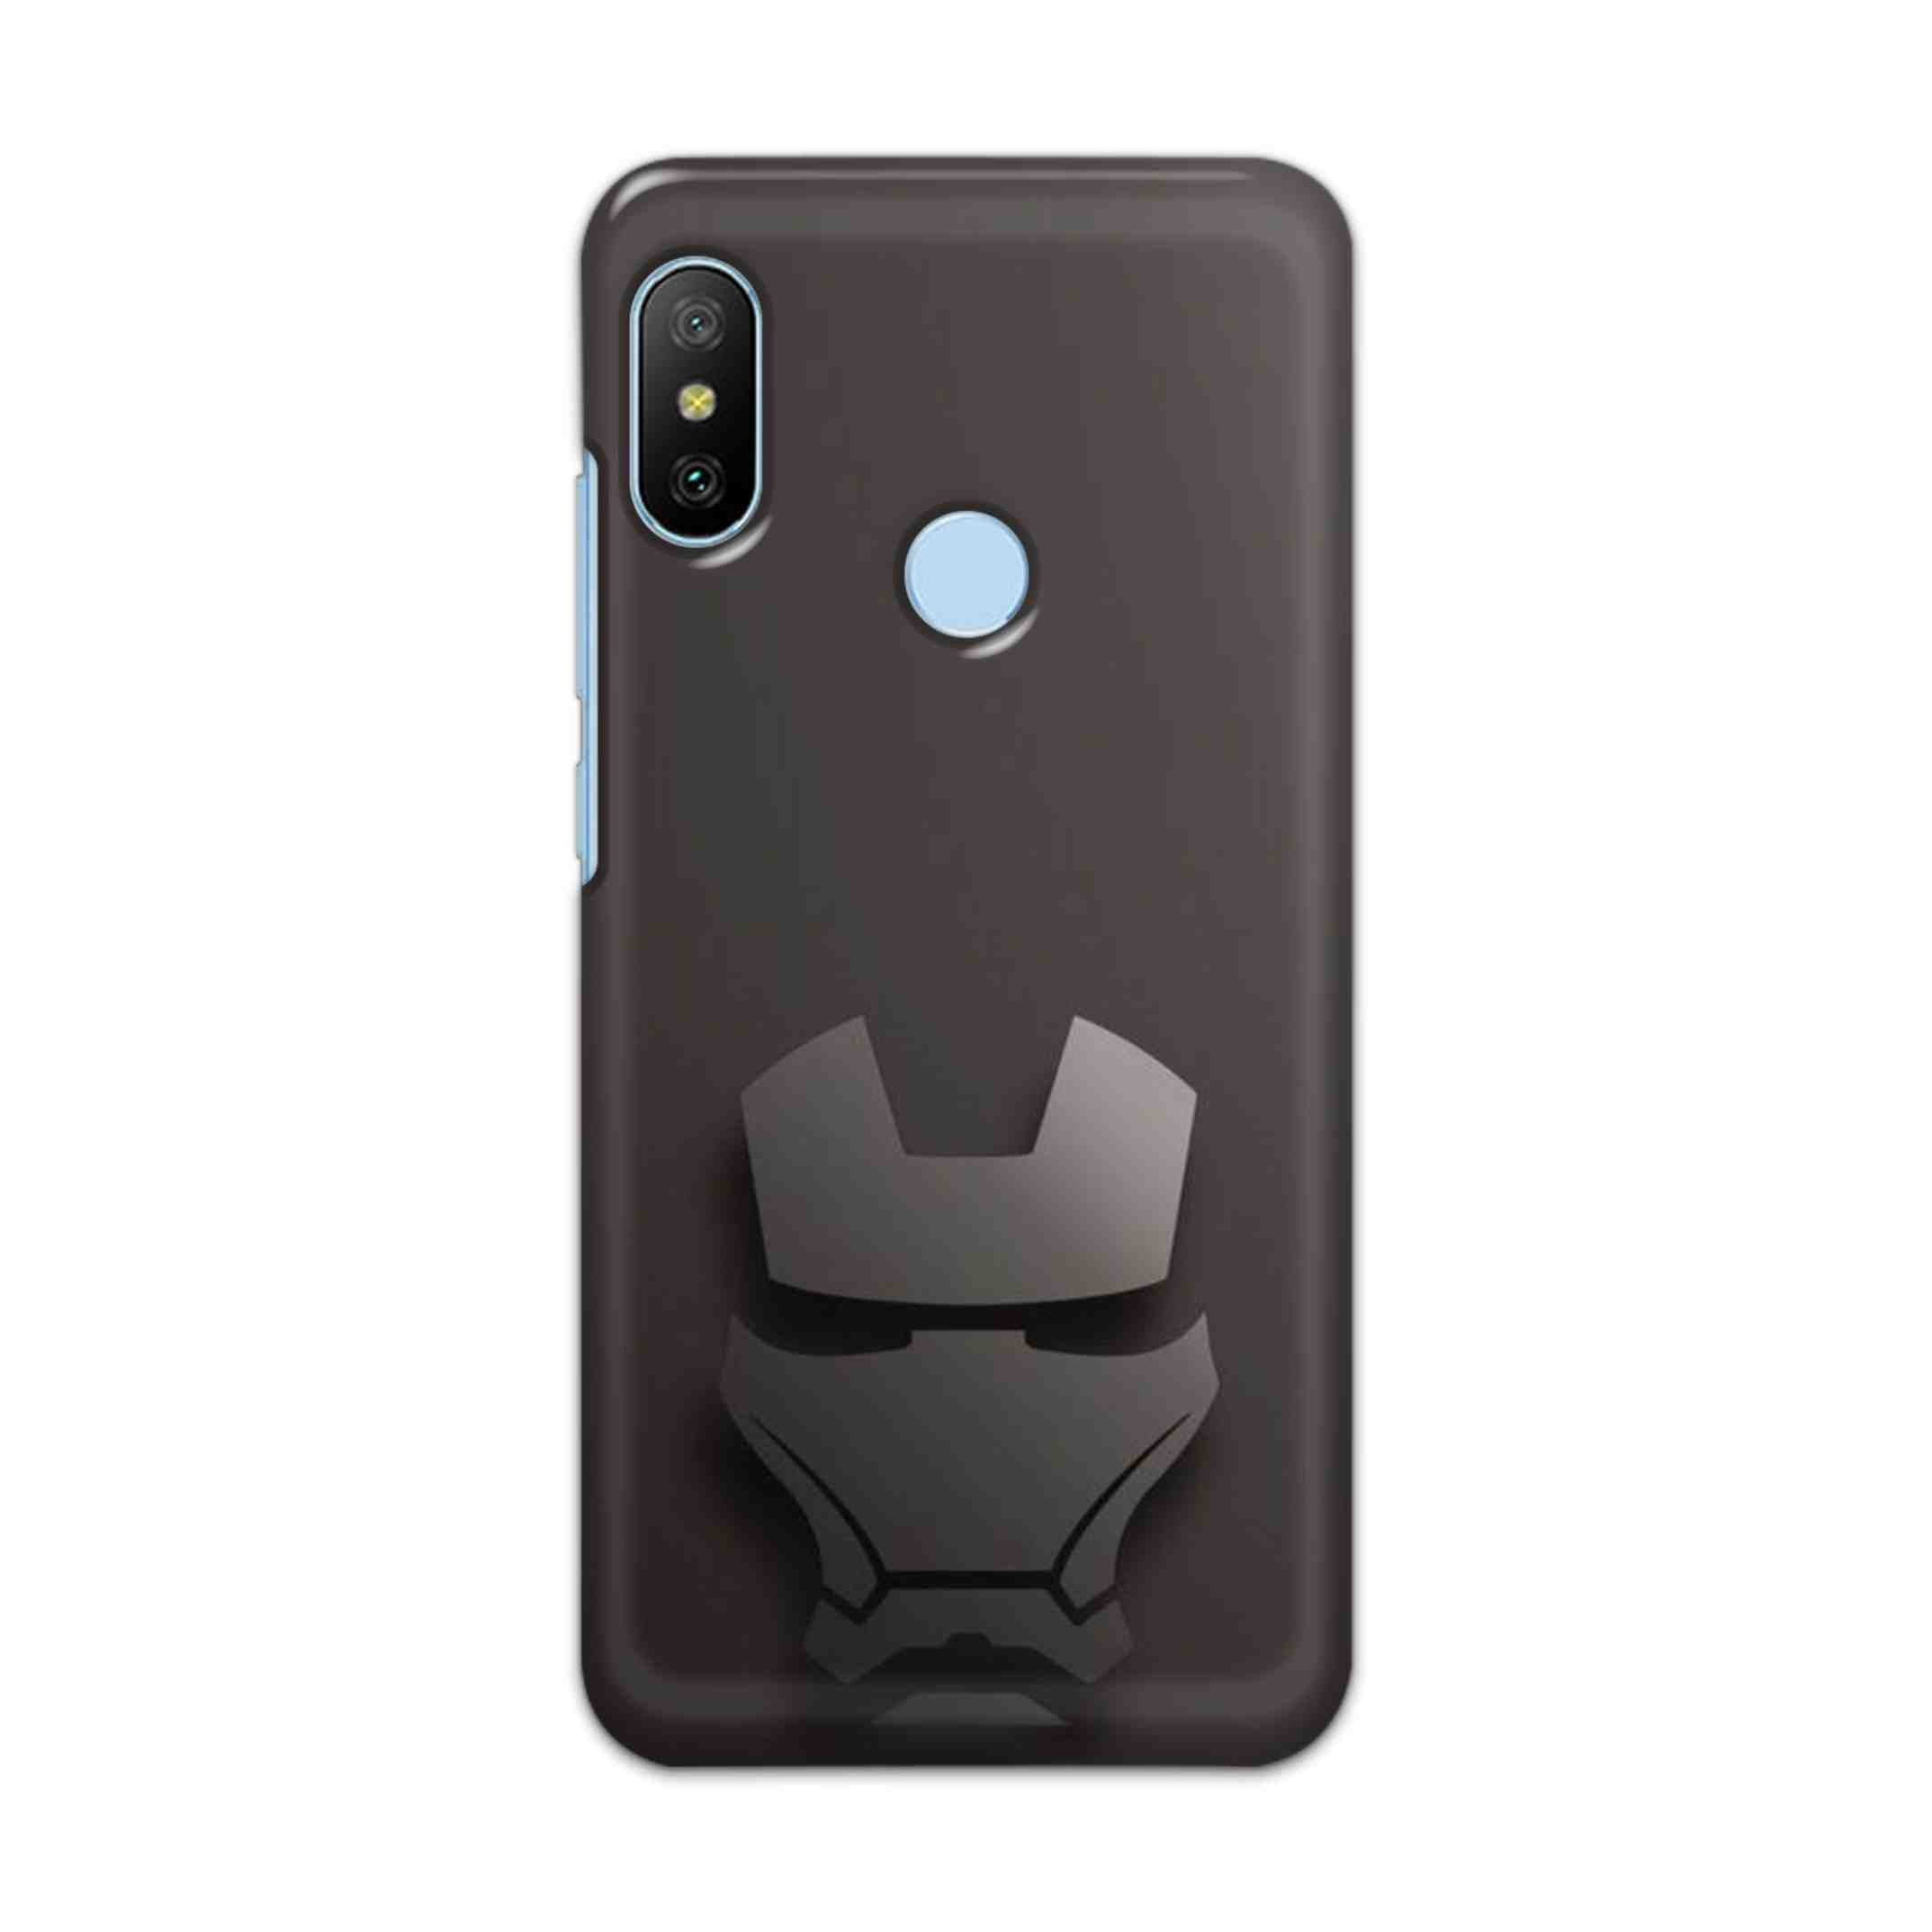 Buy Iron Man Logo Hard Back Mobile Phone Case/Cover For Xiaomi Redmi 6 Pro Online